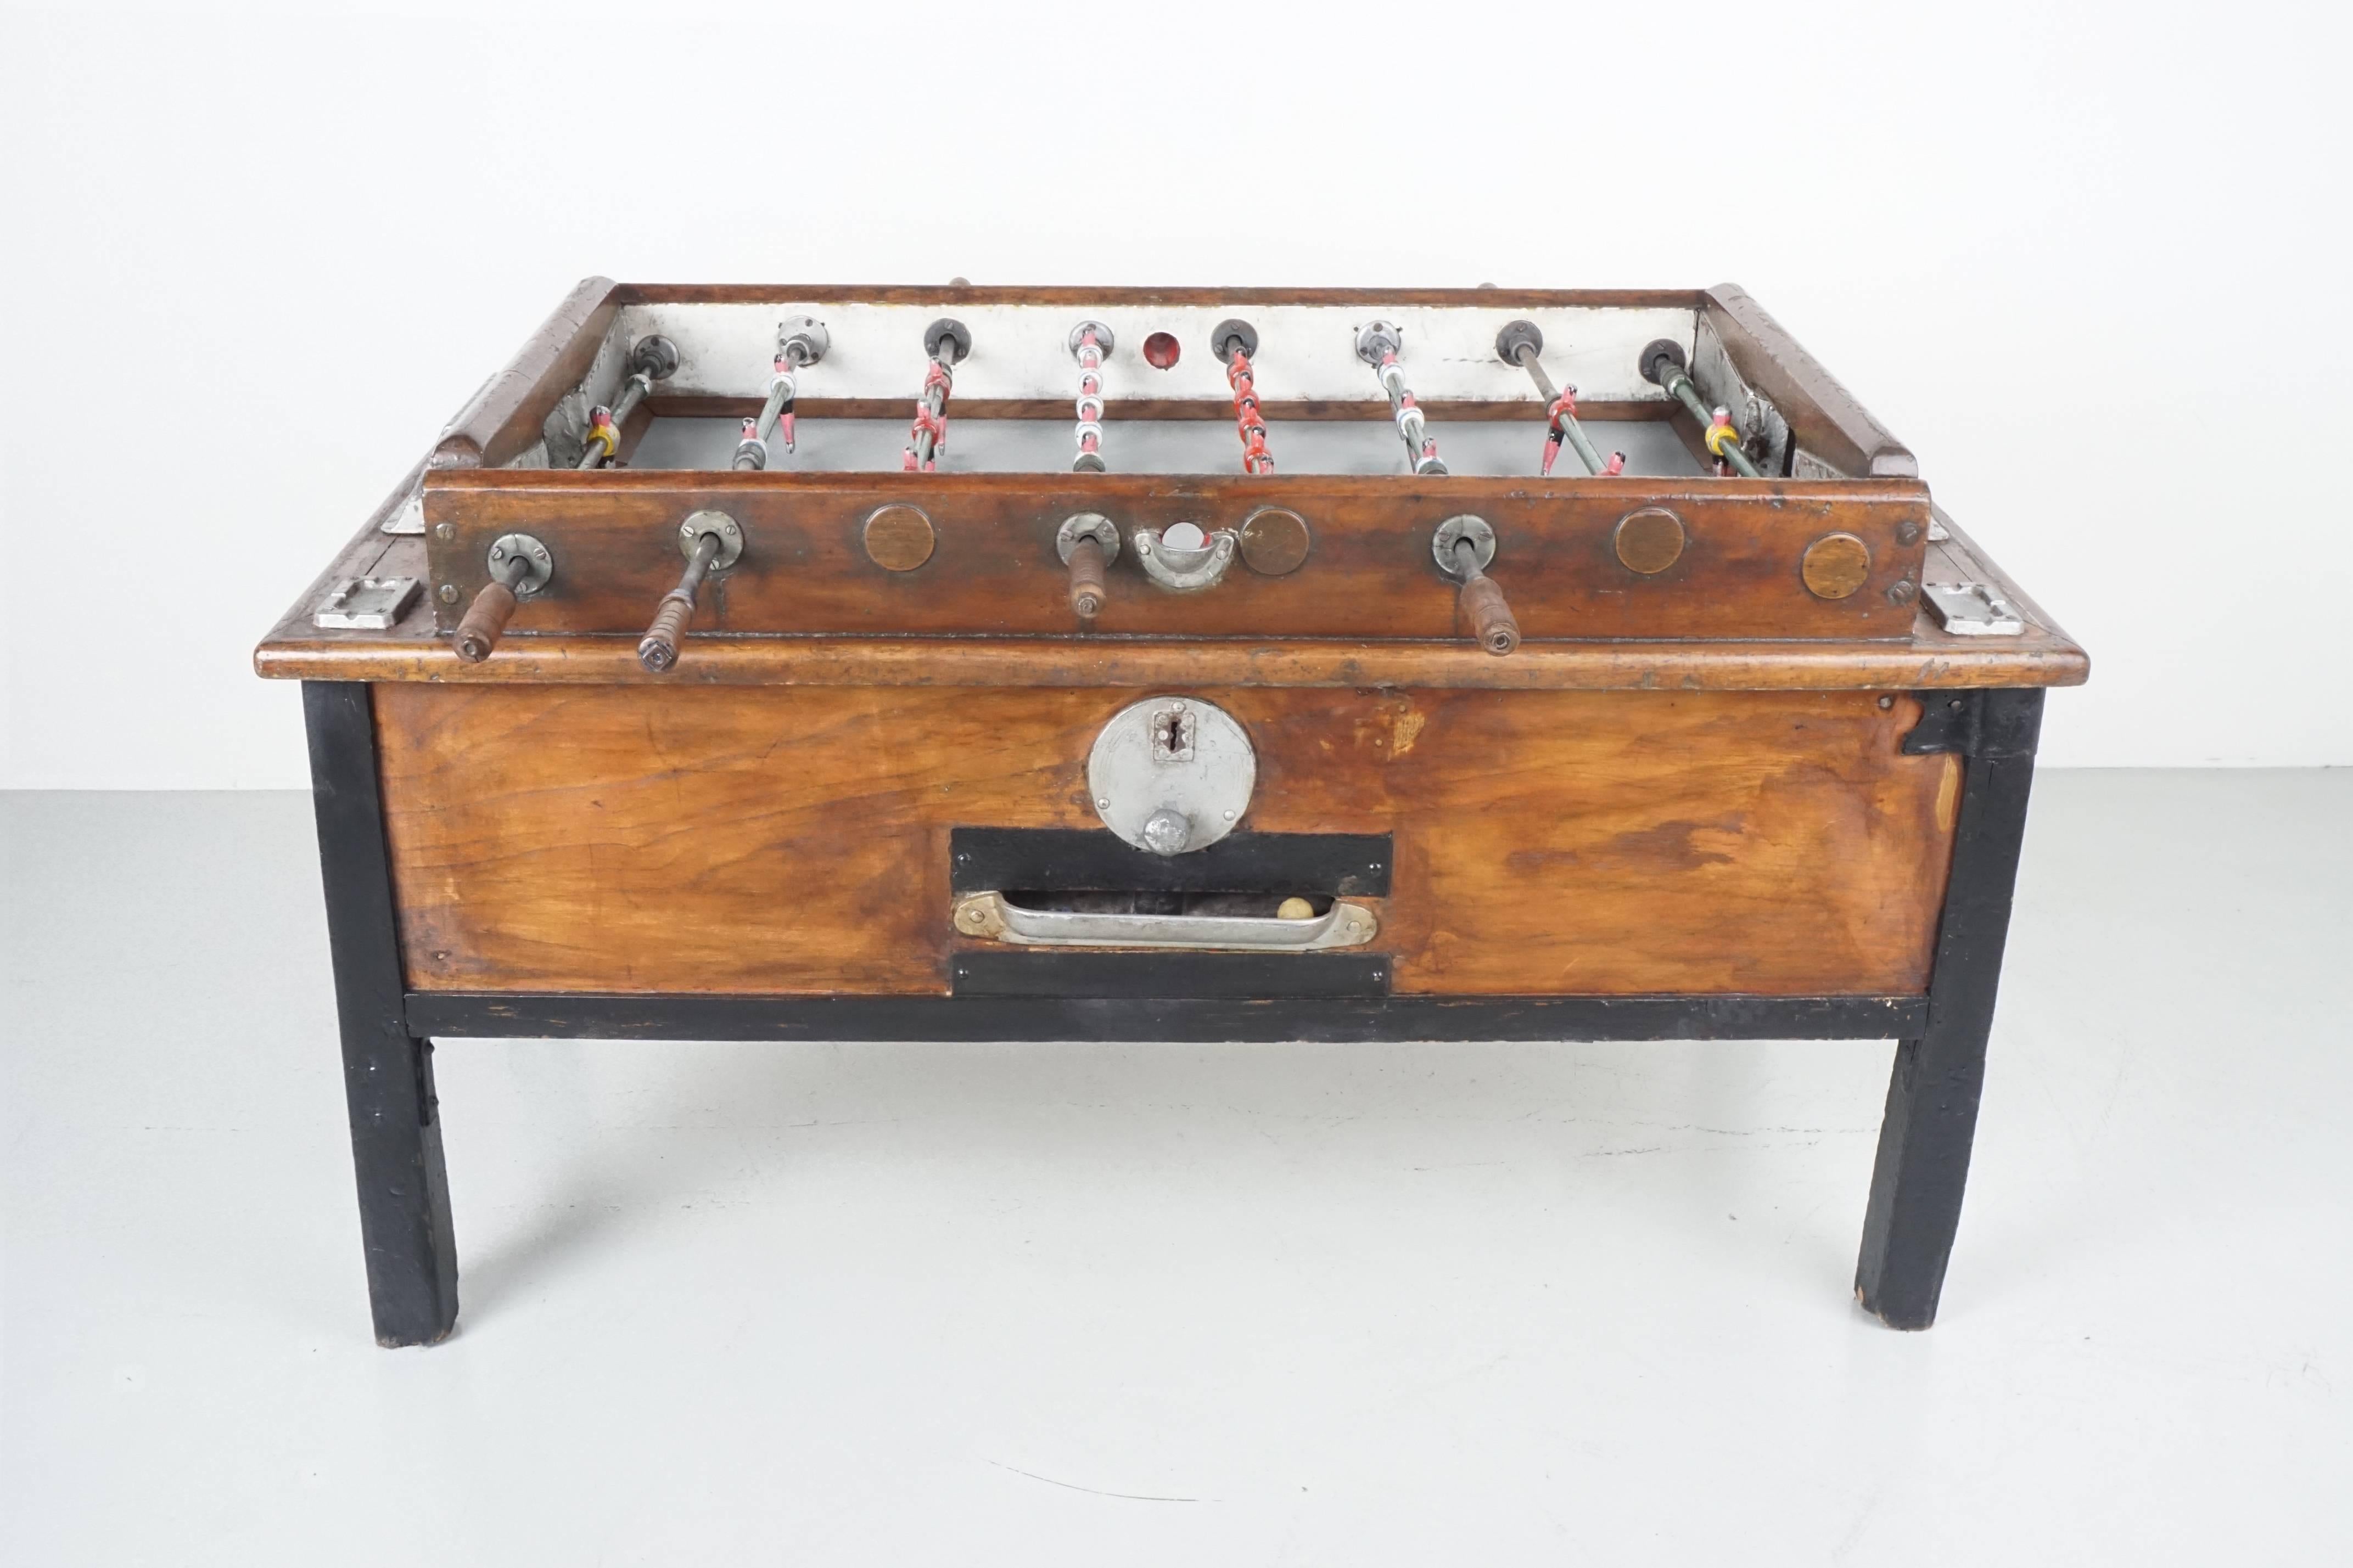 1940s Italian foosball table with wonderful patina. Professionally restored with original players, new linoleum playing field, original metal goals, wood score pegs and three balls.

